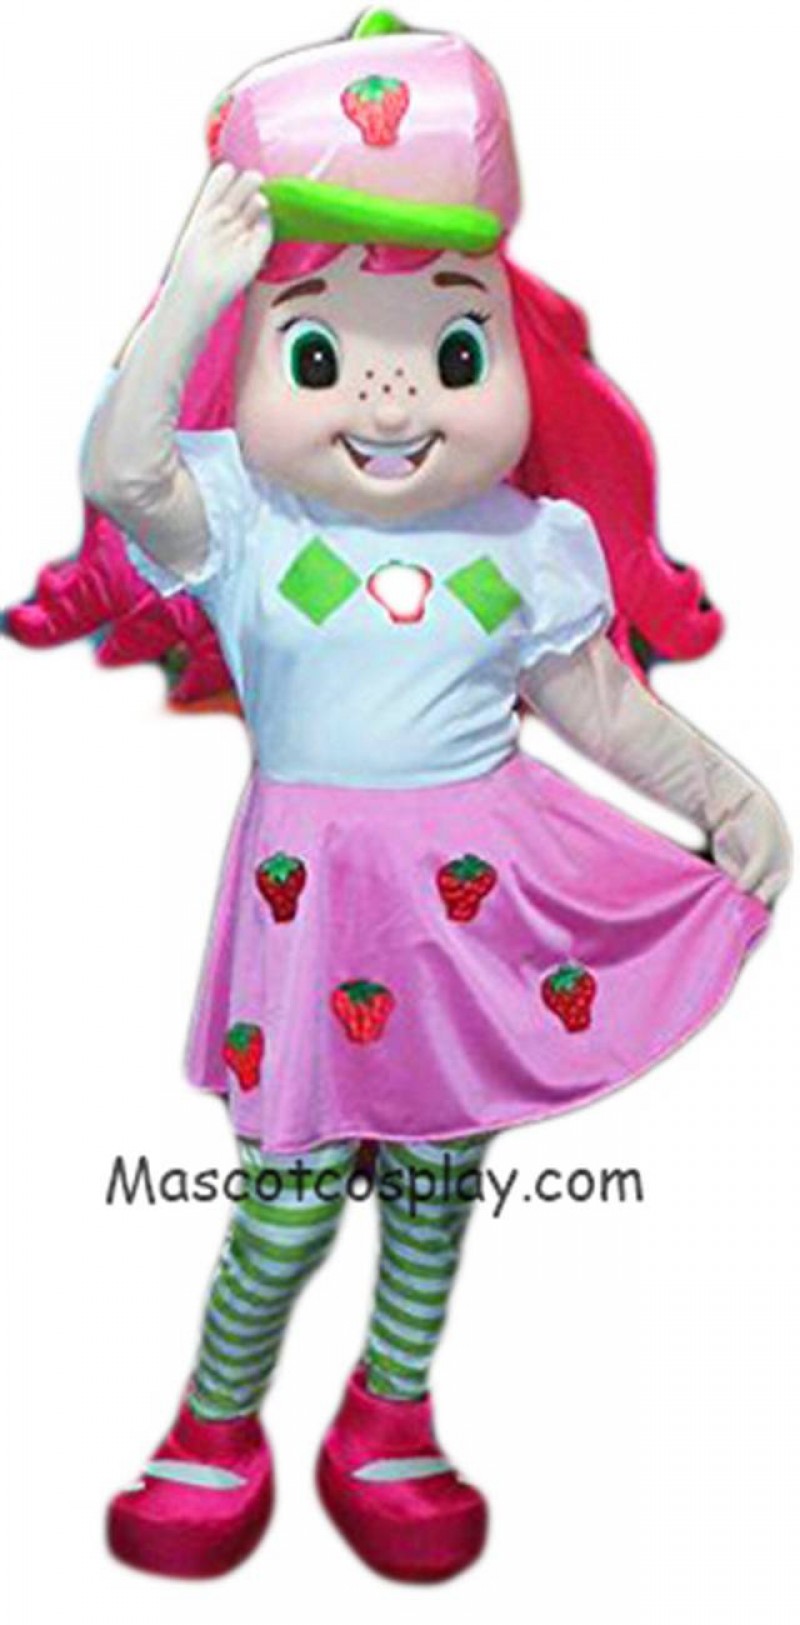 Hot Sale Adorable Realistic New Popular Professional Strawberry Shortcake Mascot Costume Girl with Pink Hair Character Cartoon Costume